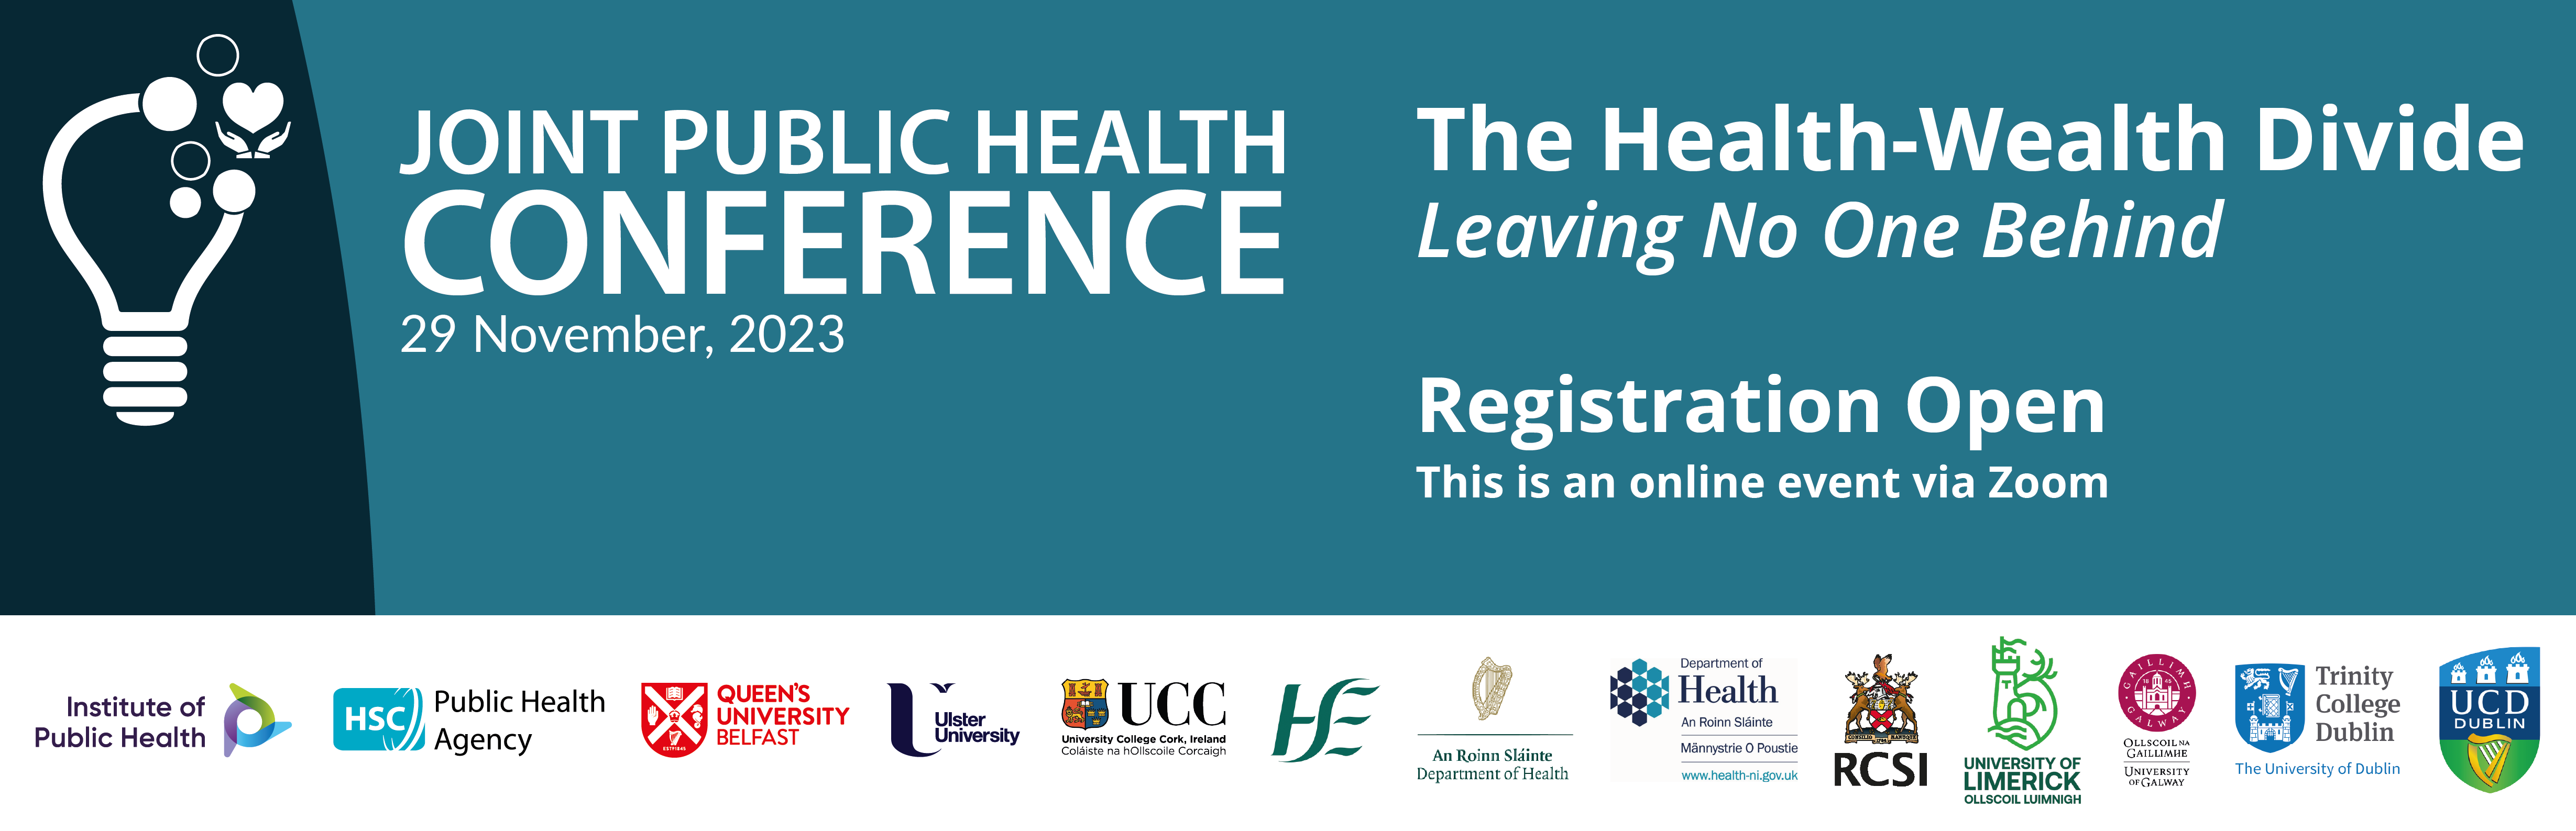 Joint North South Public Health Conference Call for abstracts extended